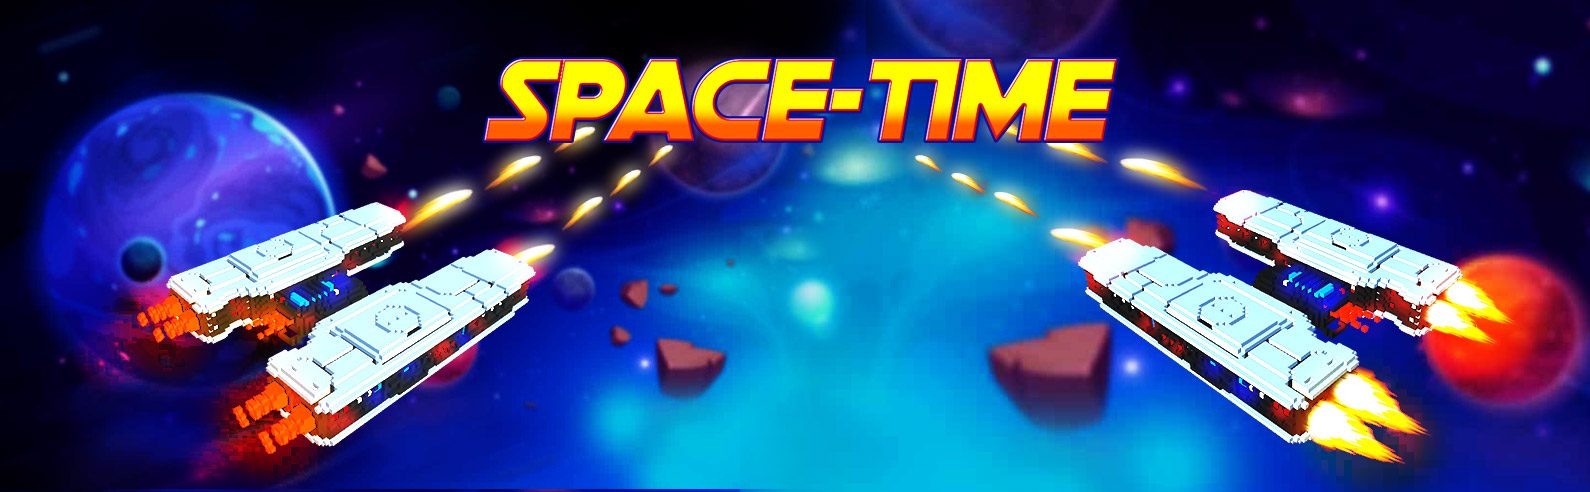 Space-Time